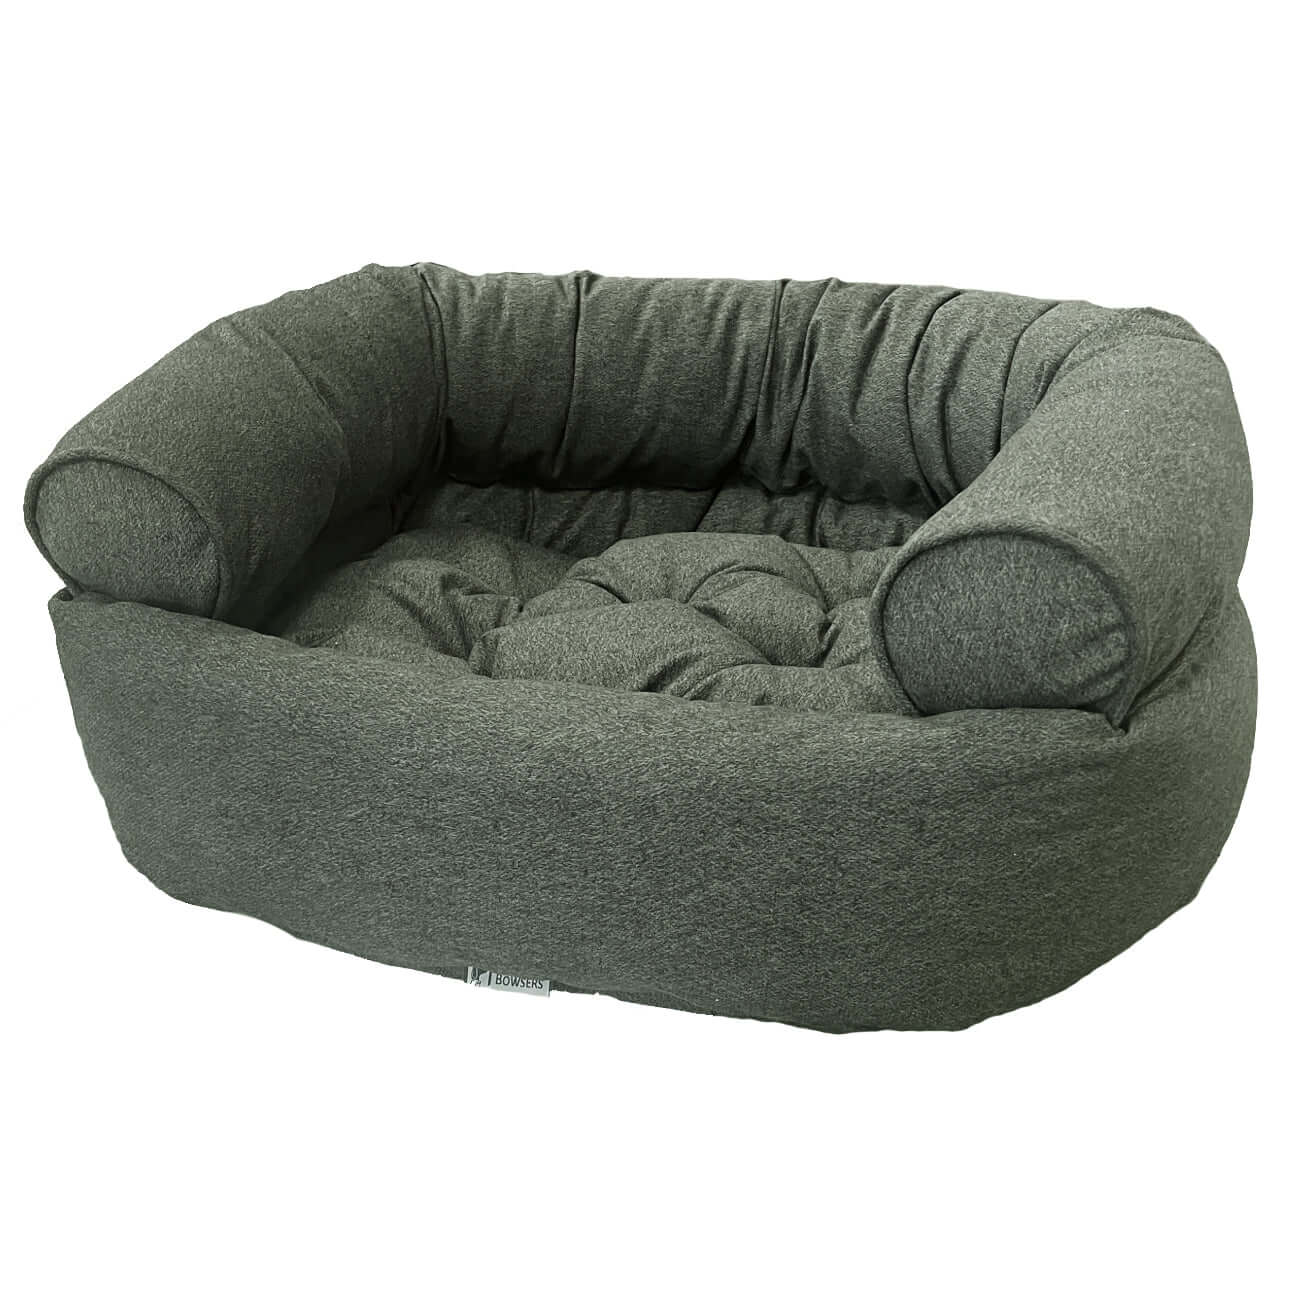 Iron Mountain Chenille Donut Pet Dog Bed